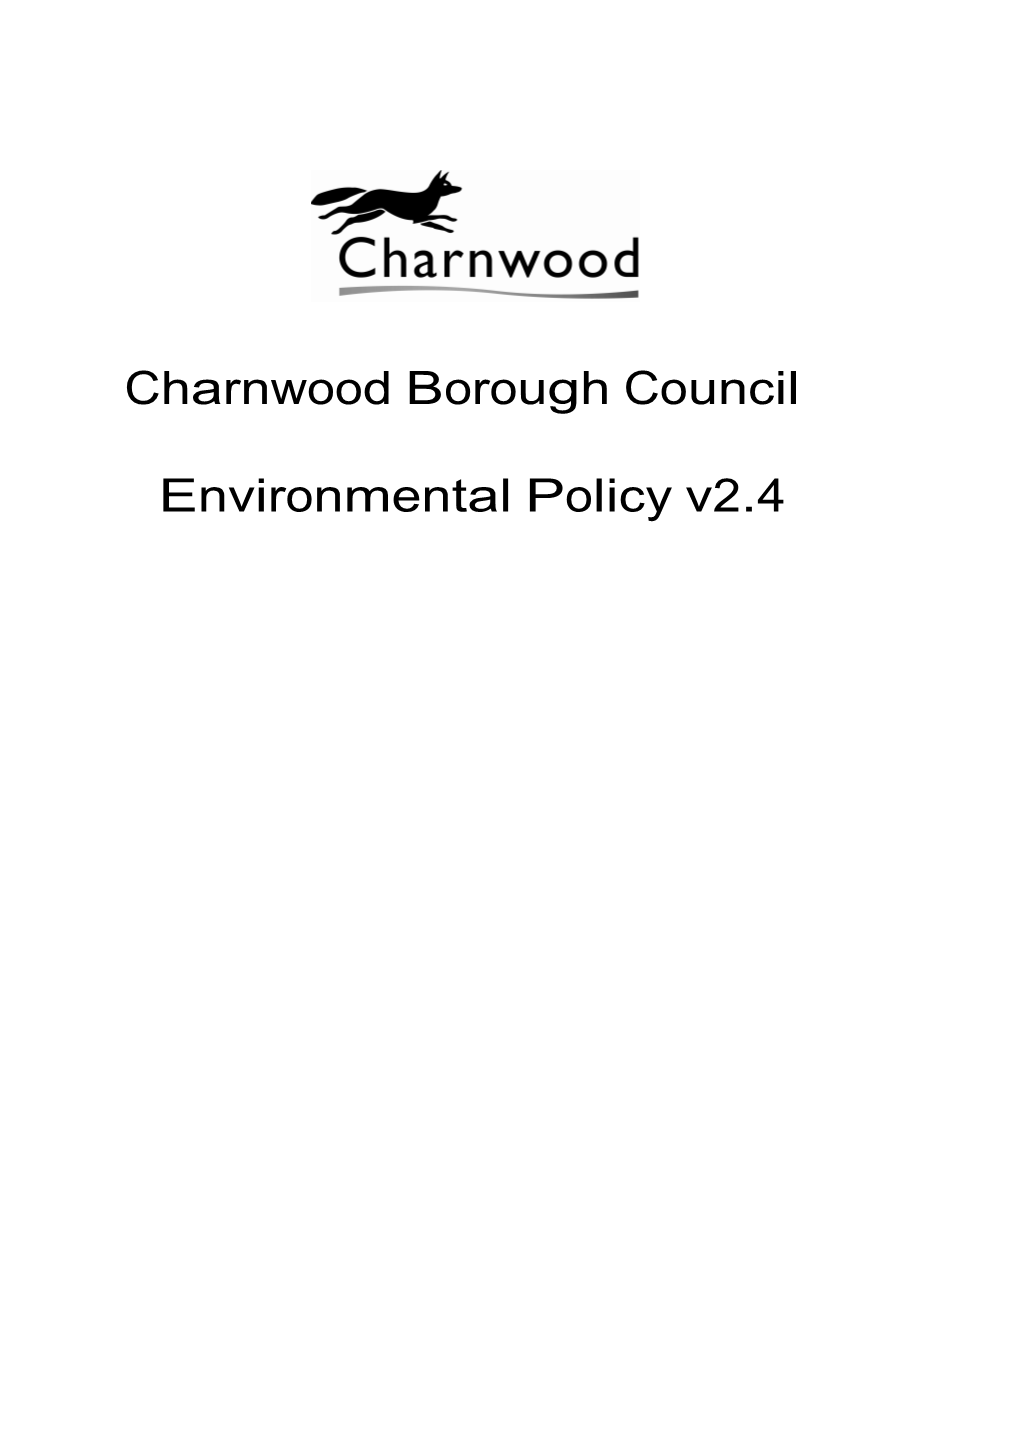 Charnwood Borough Council Is Committed to the Achievement of Outstanding Environmental